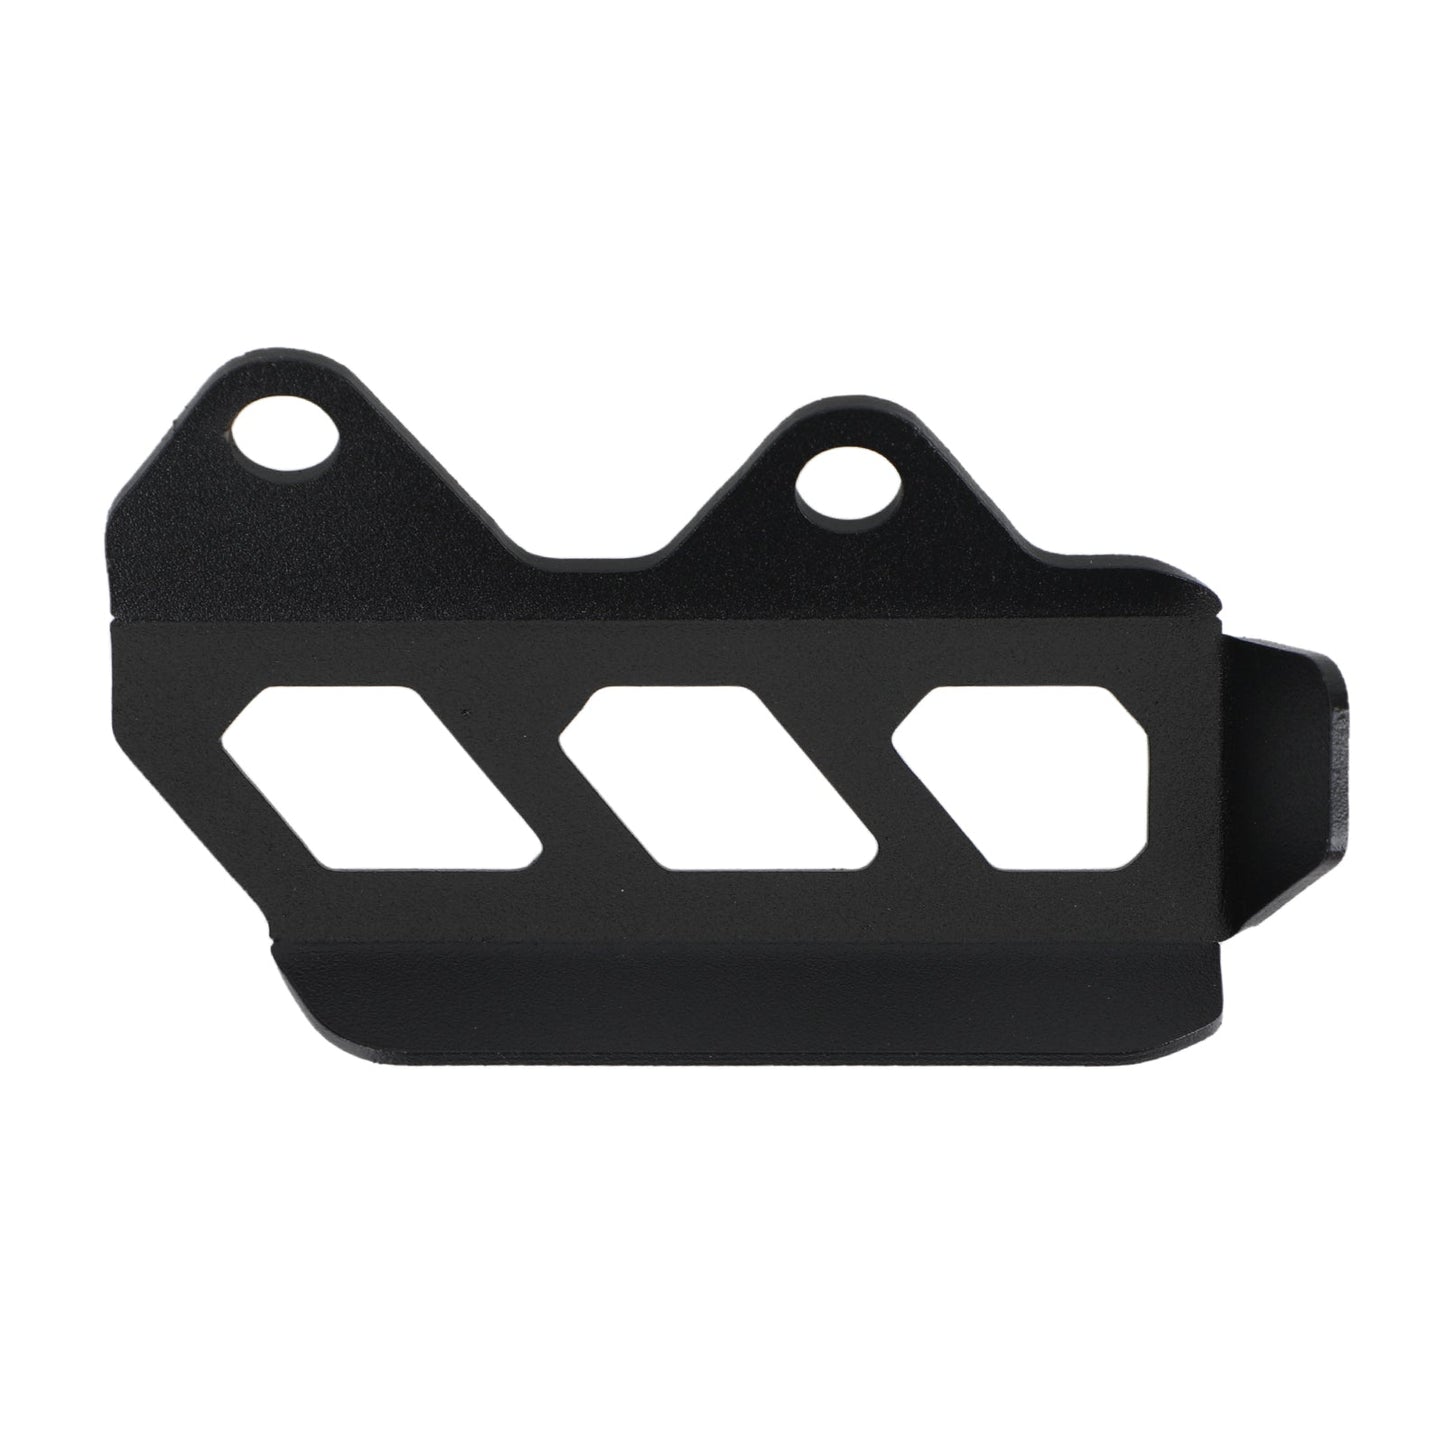 Rear Brake Master Cylinder Guard Cover fit for Yamaha TENERE 700 XTZ700 19-21